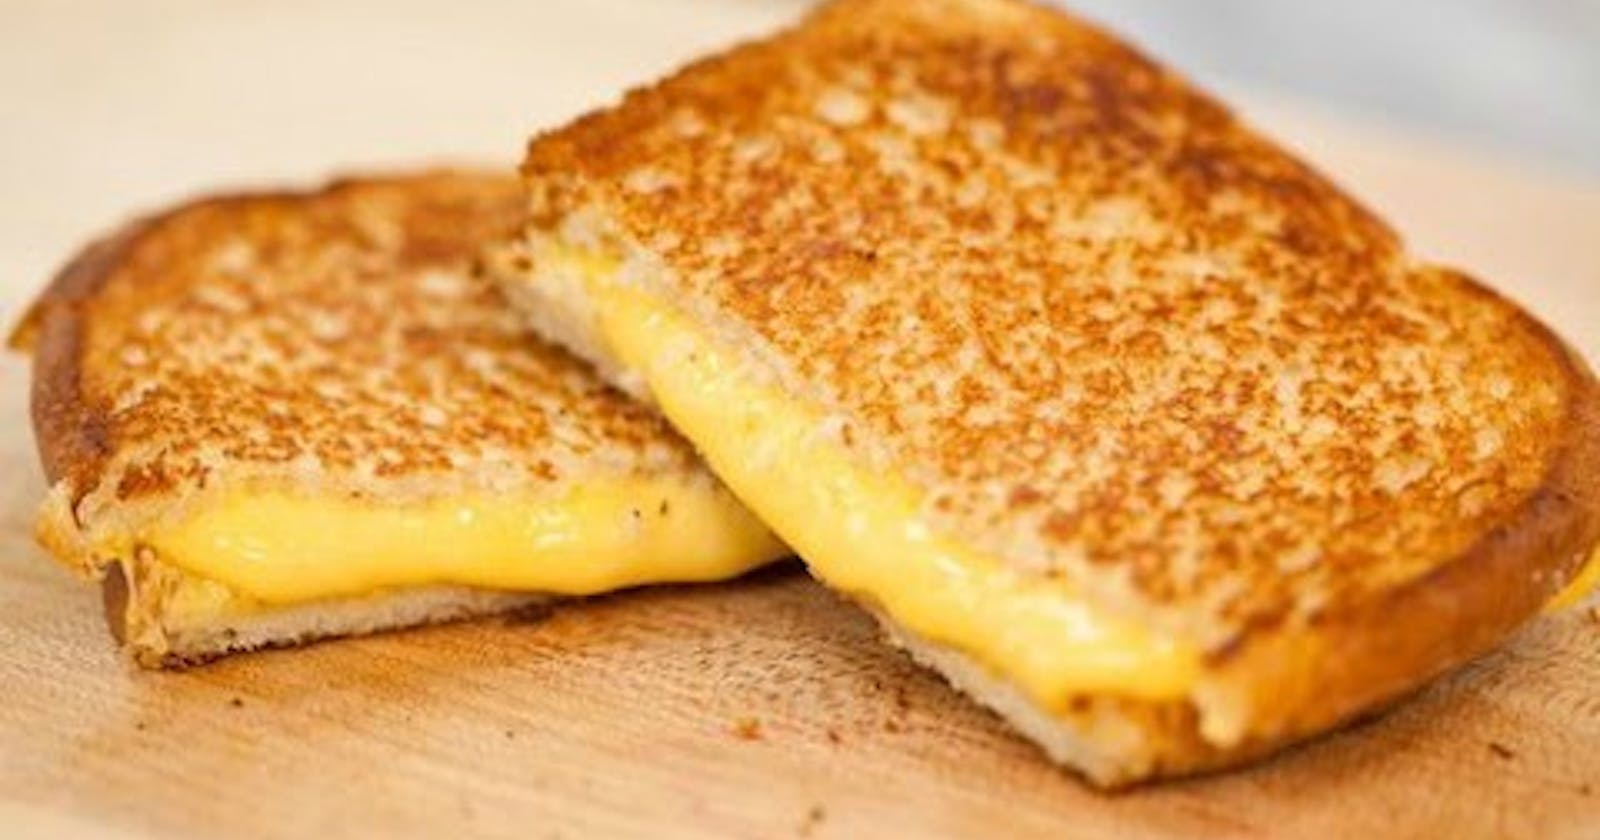 My Adventures in Cooking Grilled Cheese Sandwiches